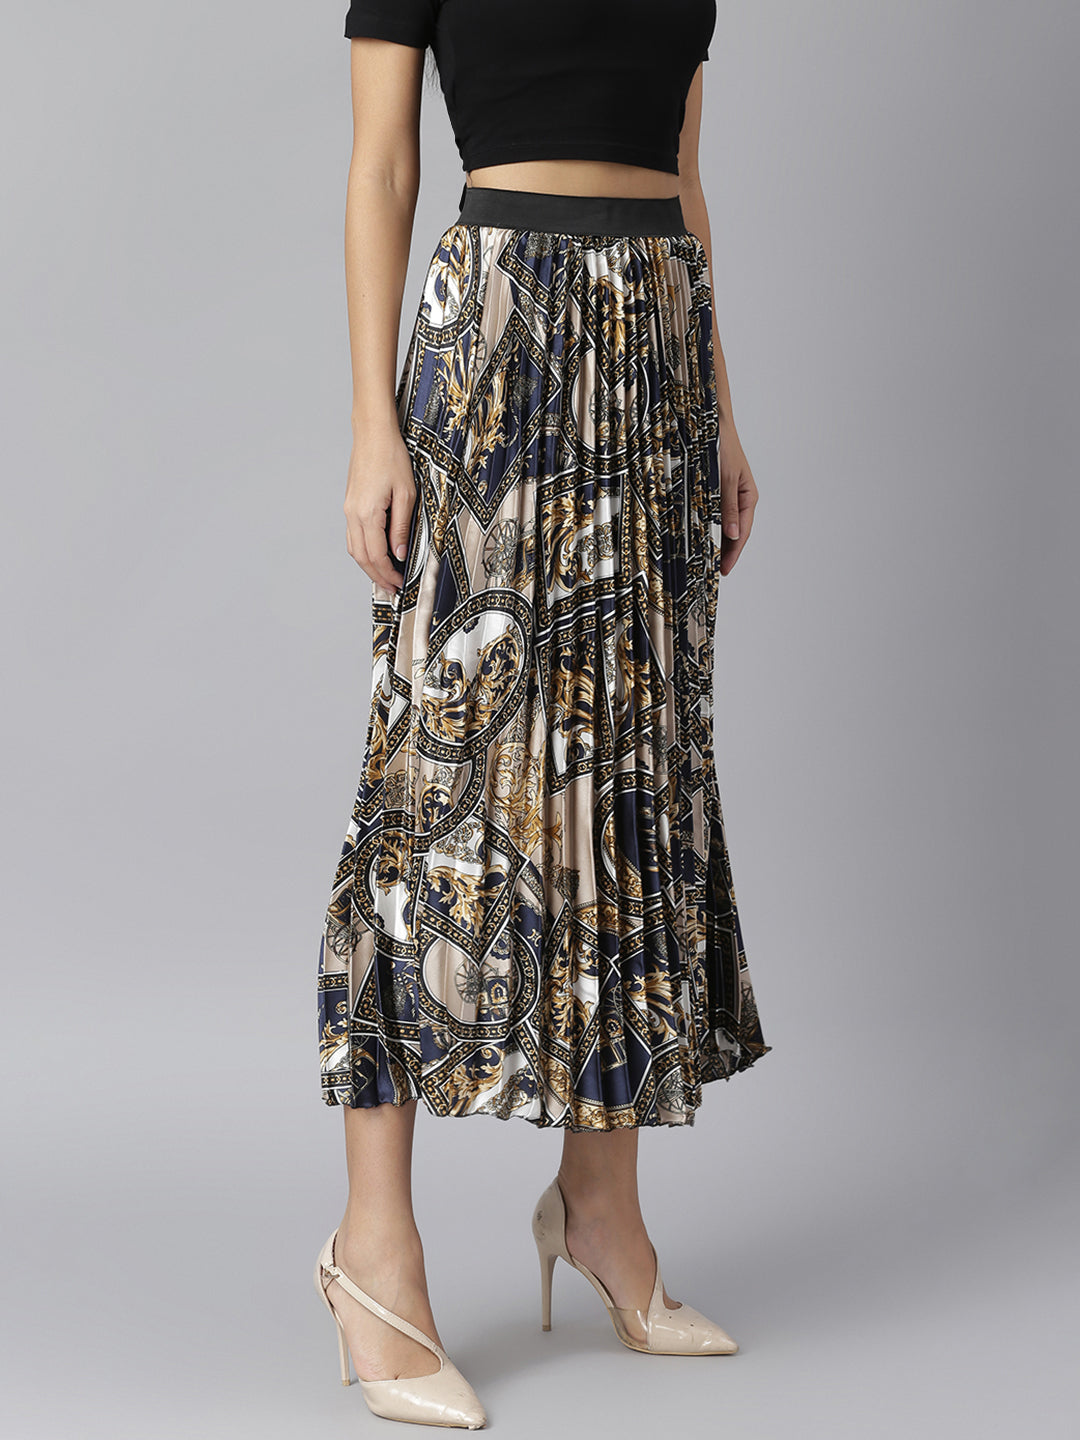 Women's pleated skirt with chain Print